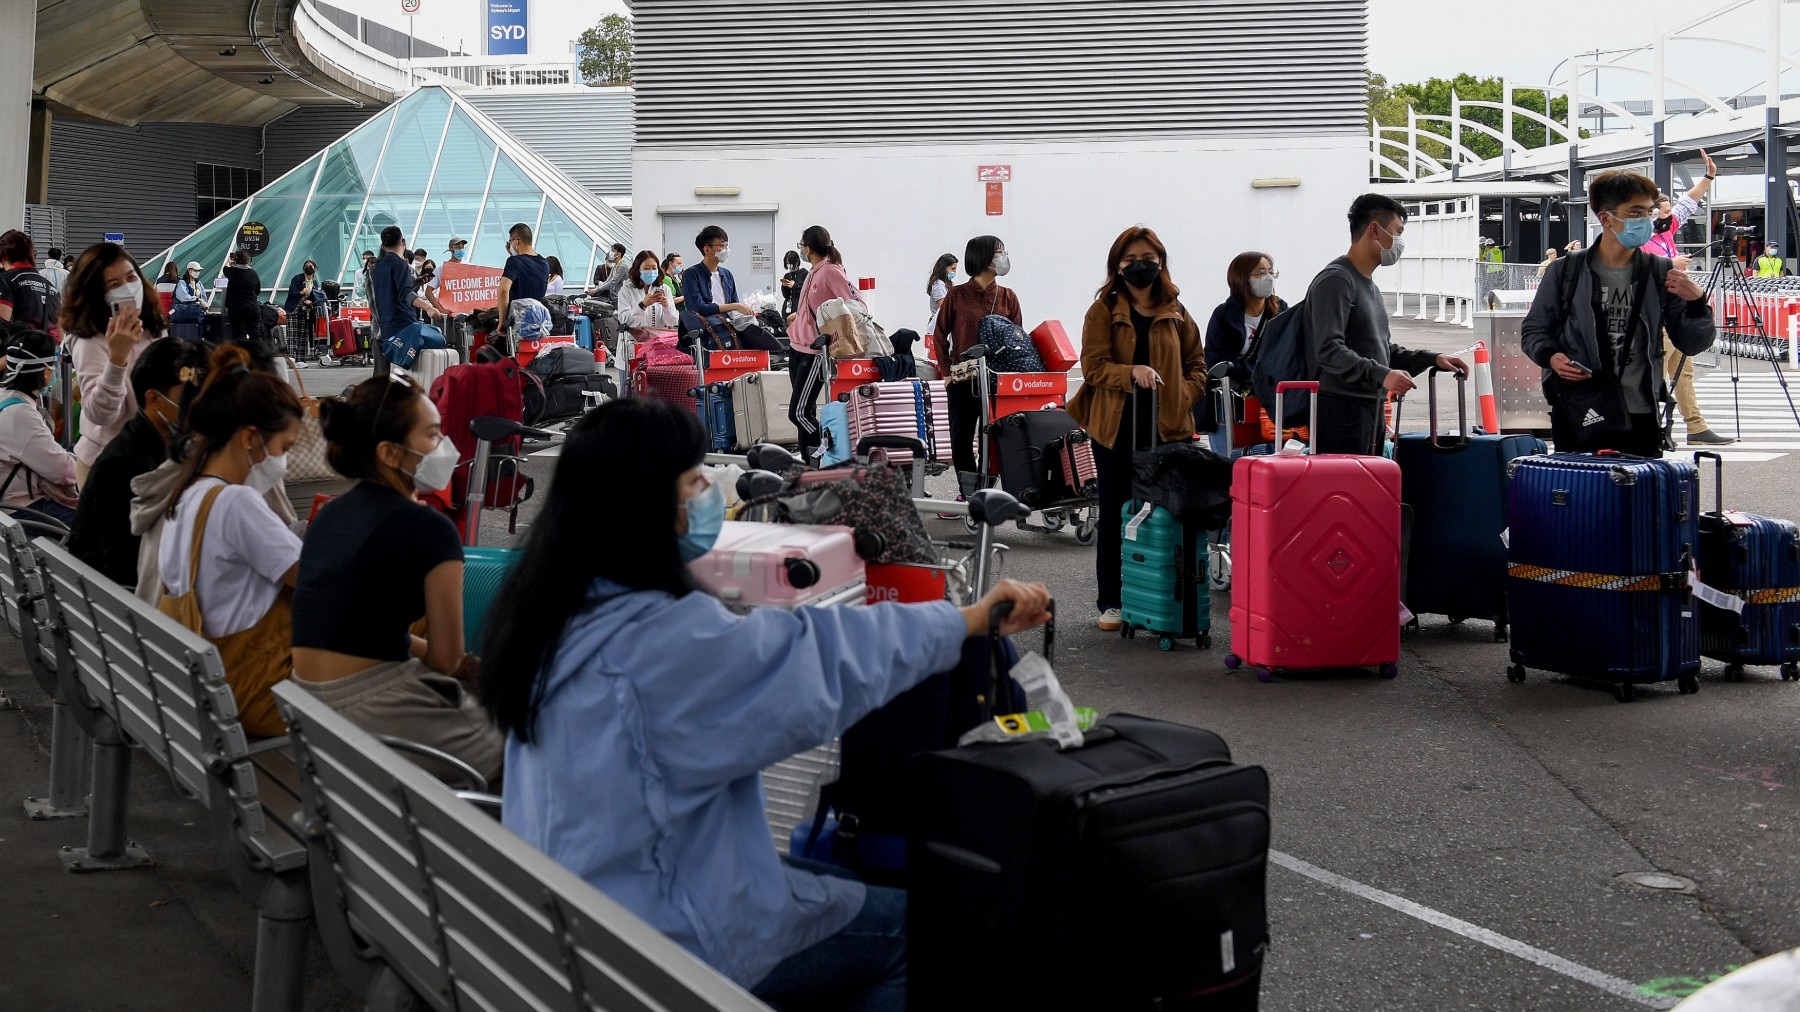 International students line up for coaches after arriving at Sydney Airport in Sydney, Monday, December 6, 2021. AAP/Bianca De Marchi